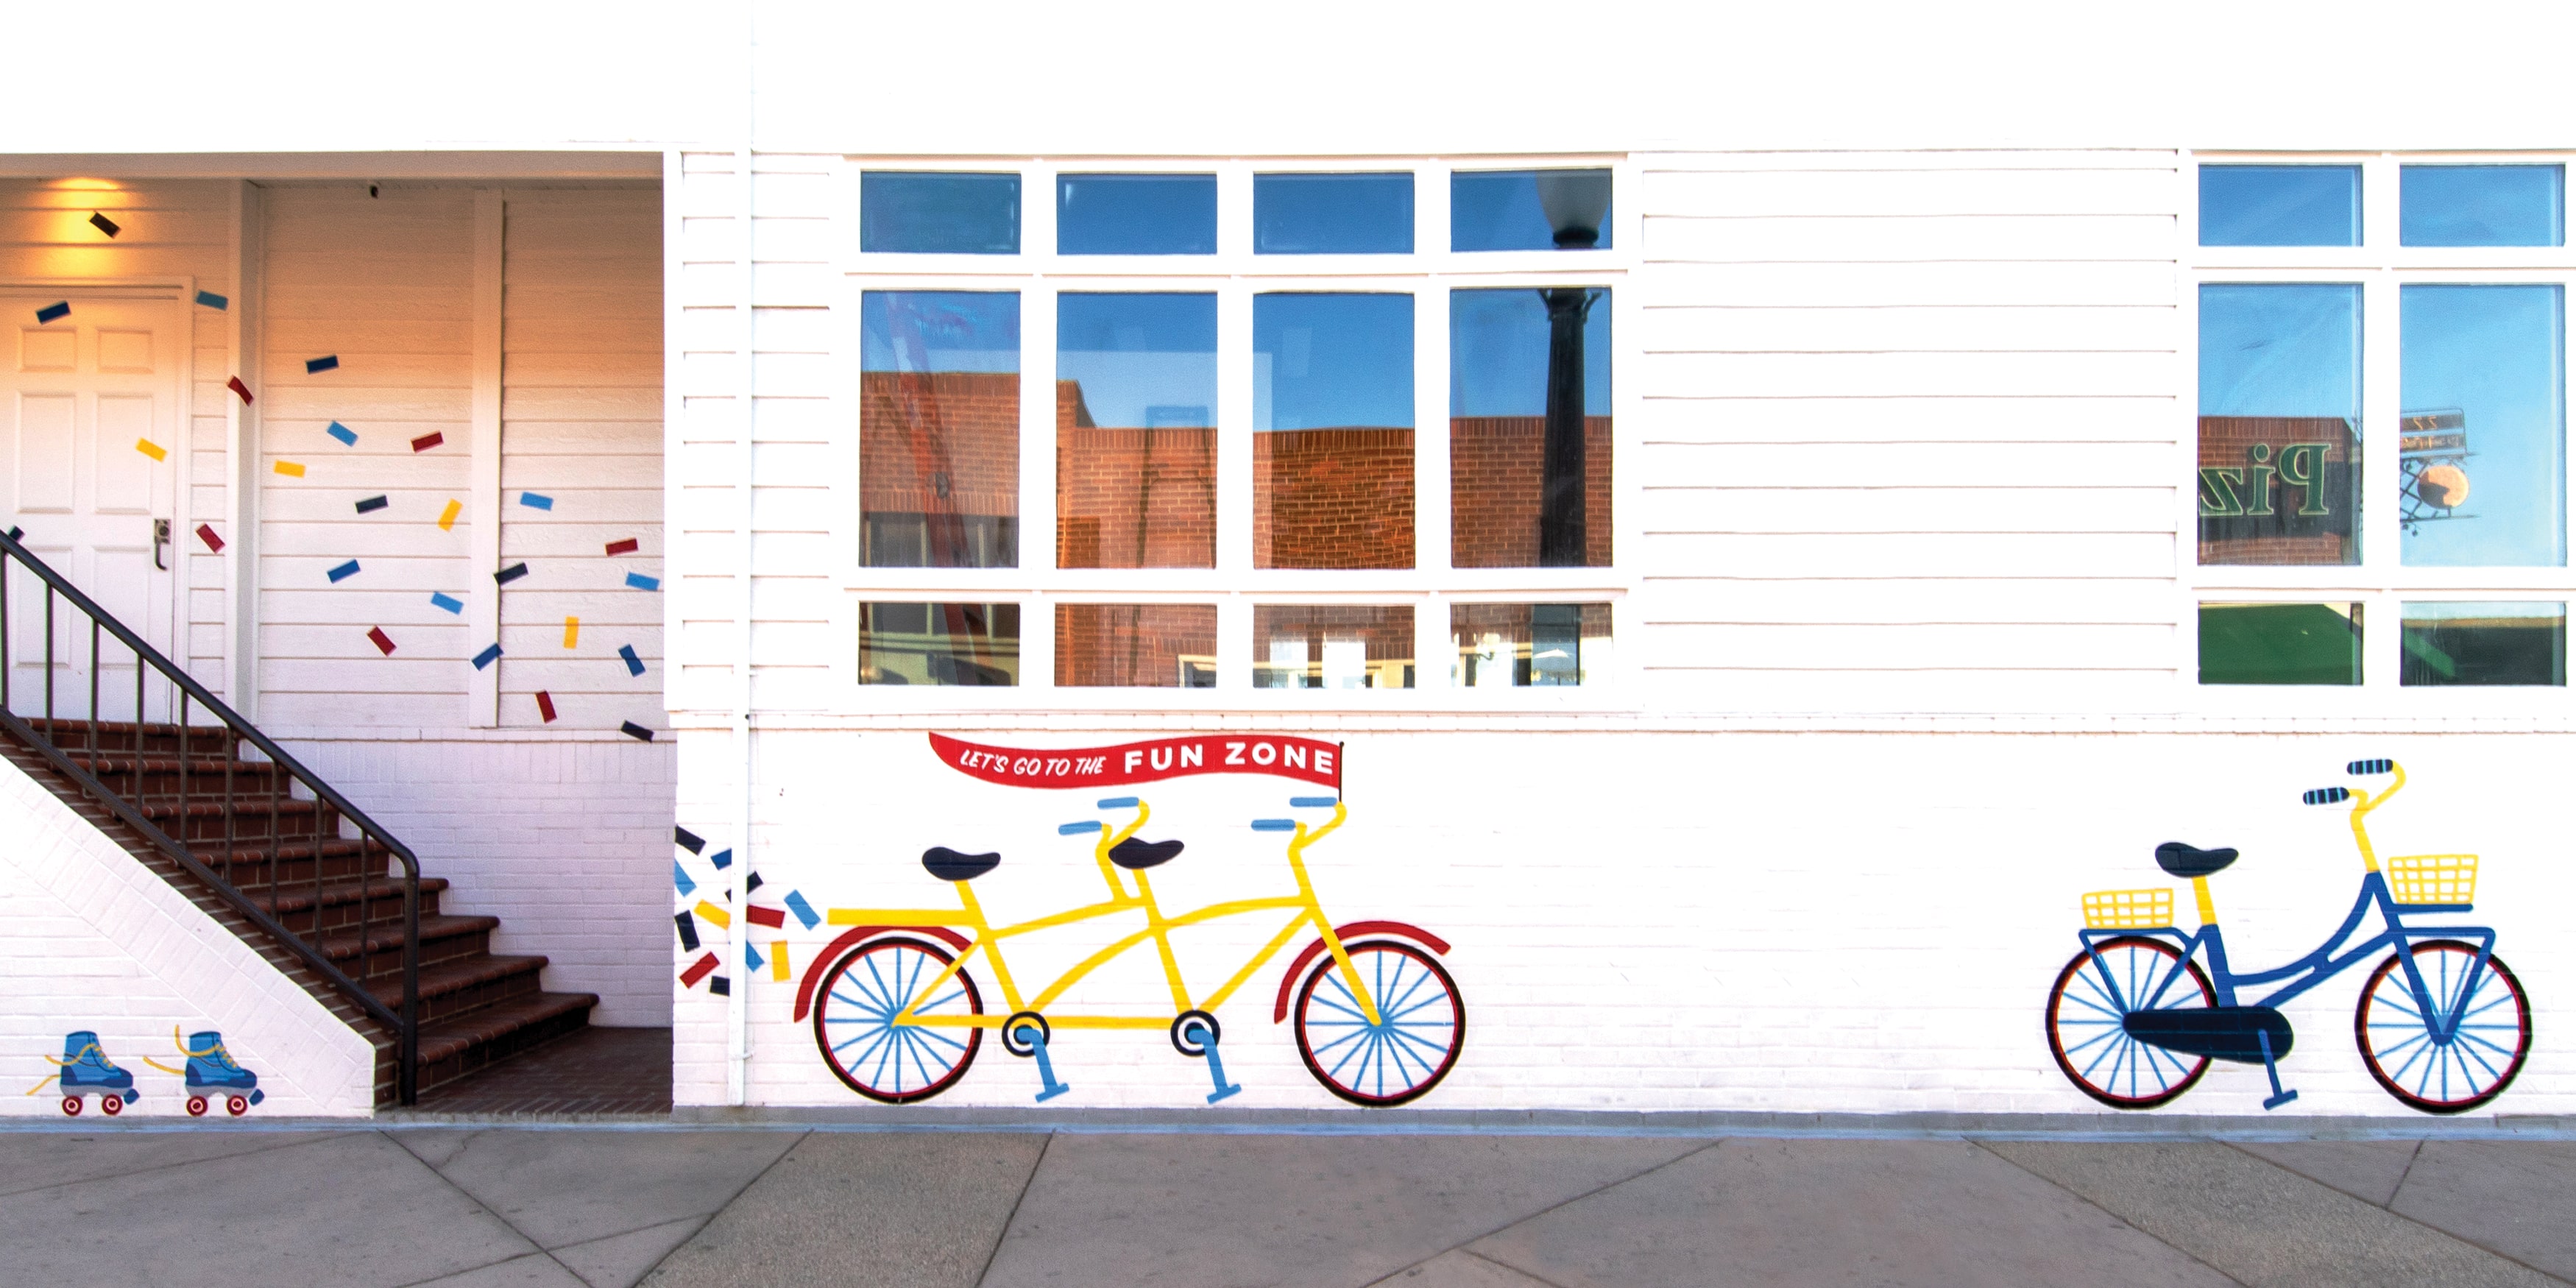 Colorful painted wall murals of bikes, confetti, and roller skates for the Balboa Fun Zone in Newport Beach, California.